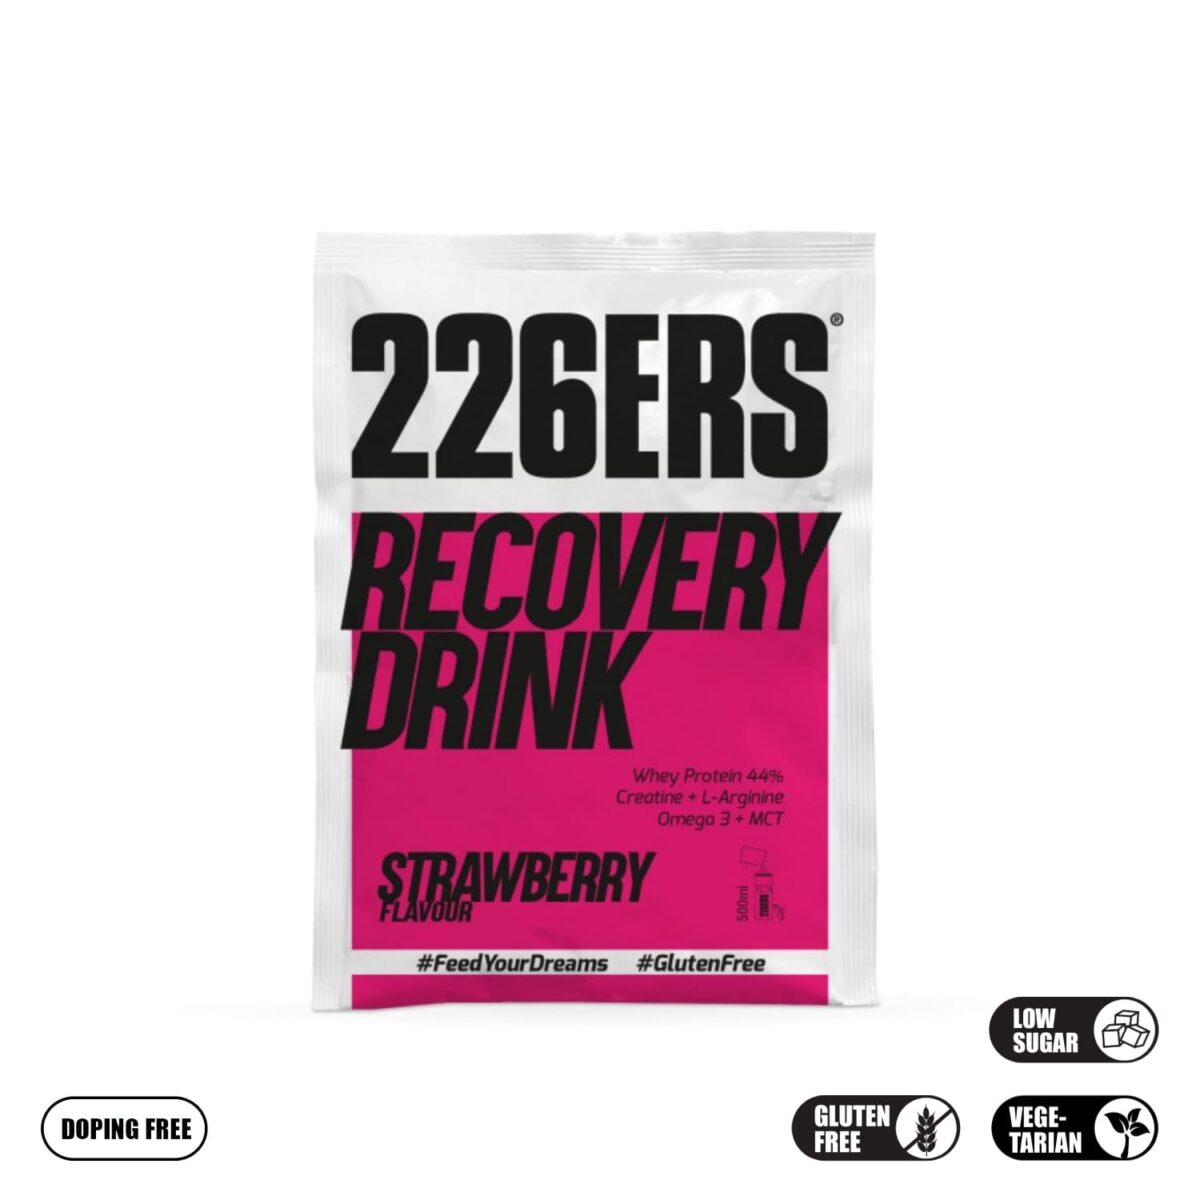 226ers_recovery drink_strawberry